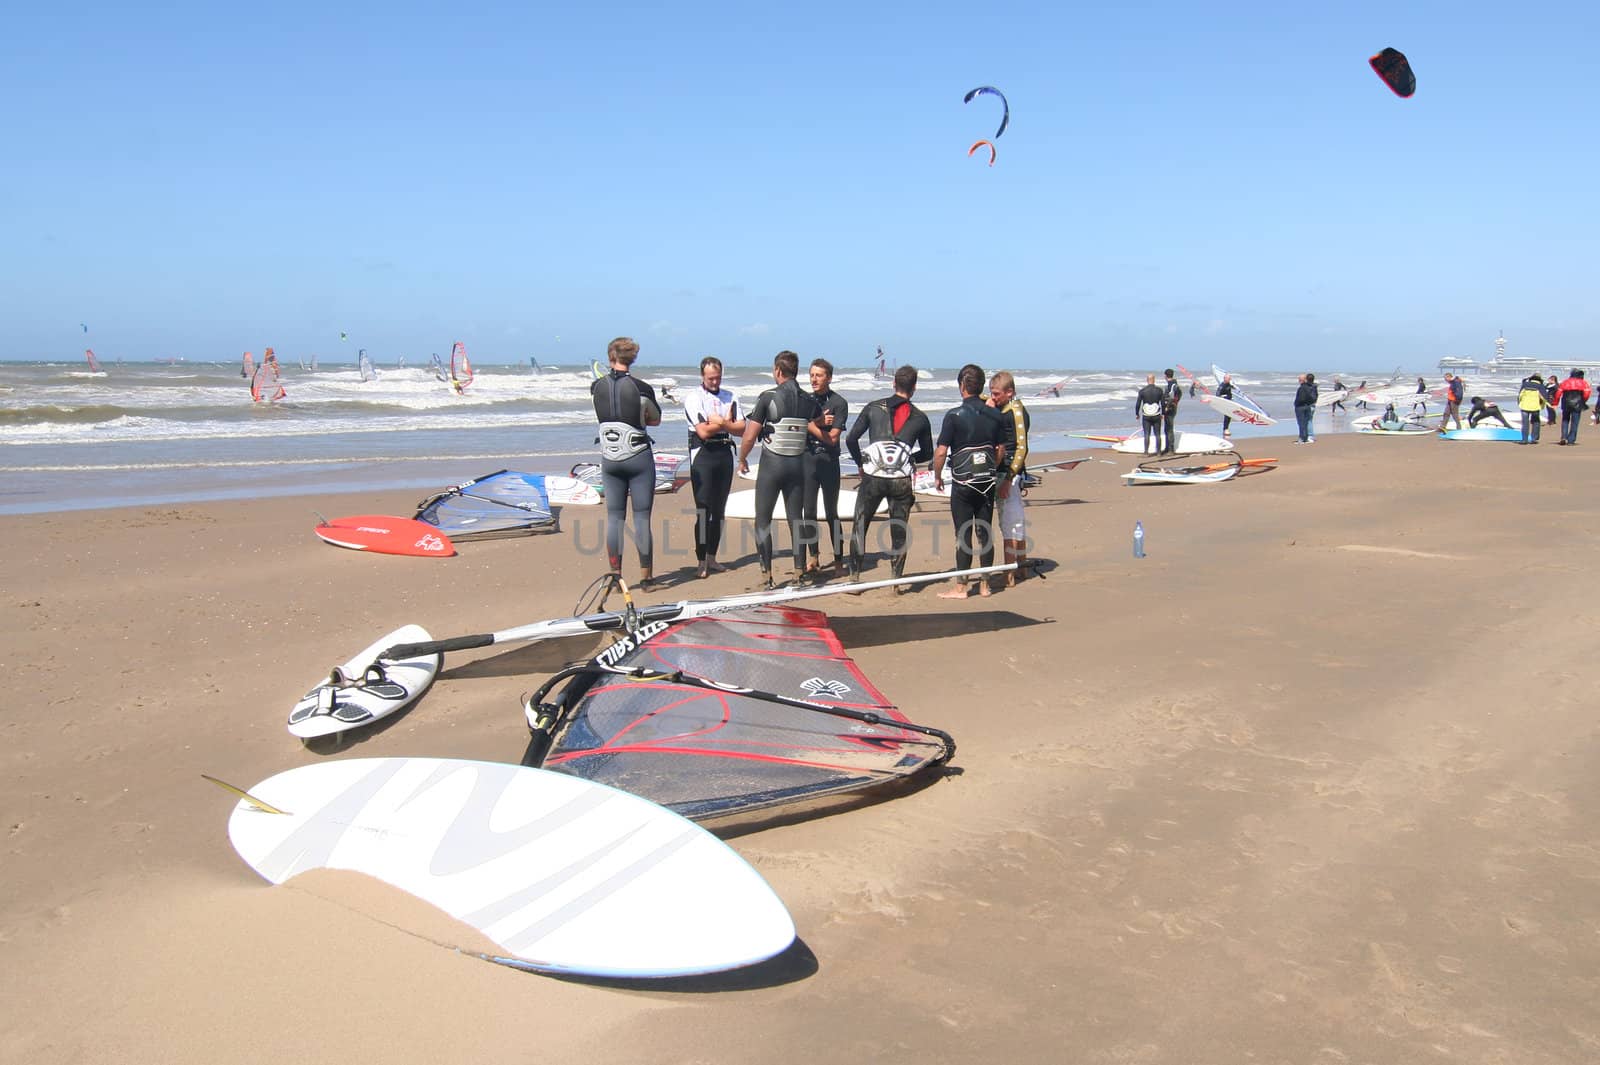 Scheveningen Surf Competition: Group of surfers on the beach